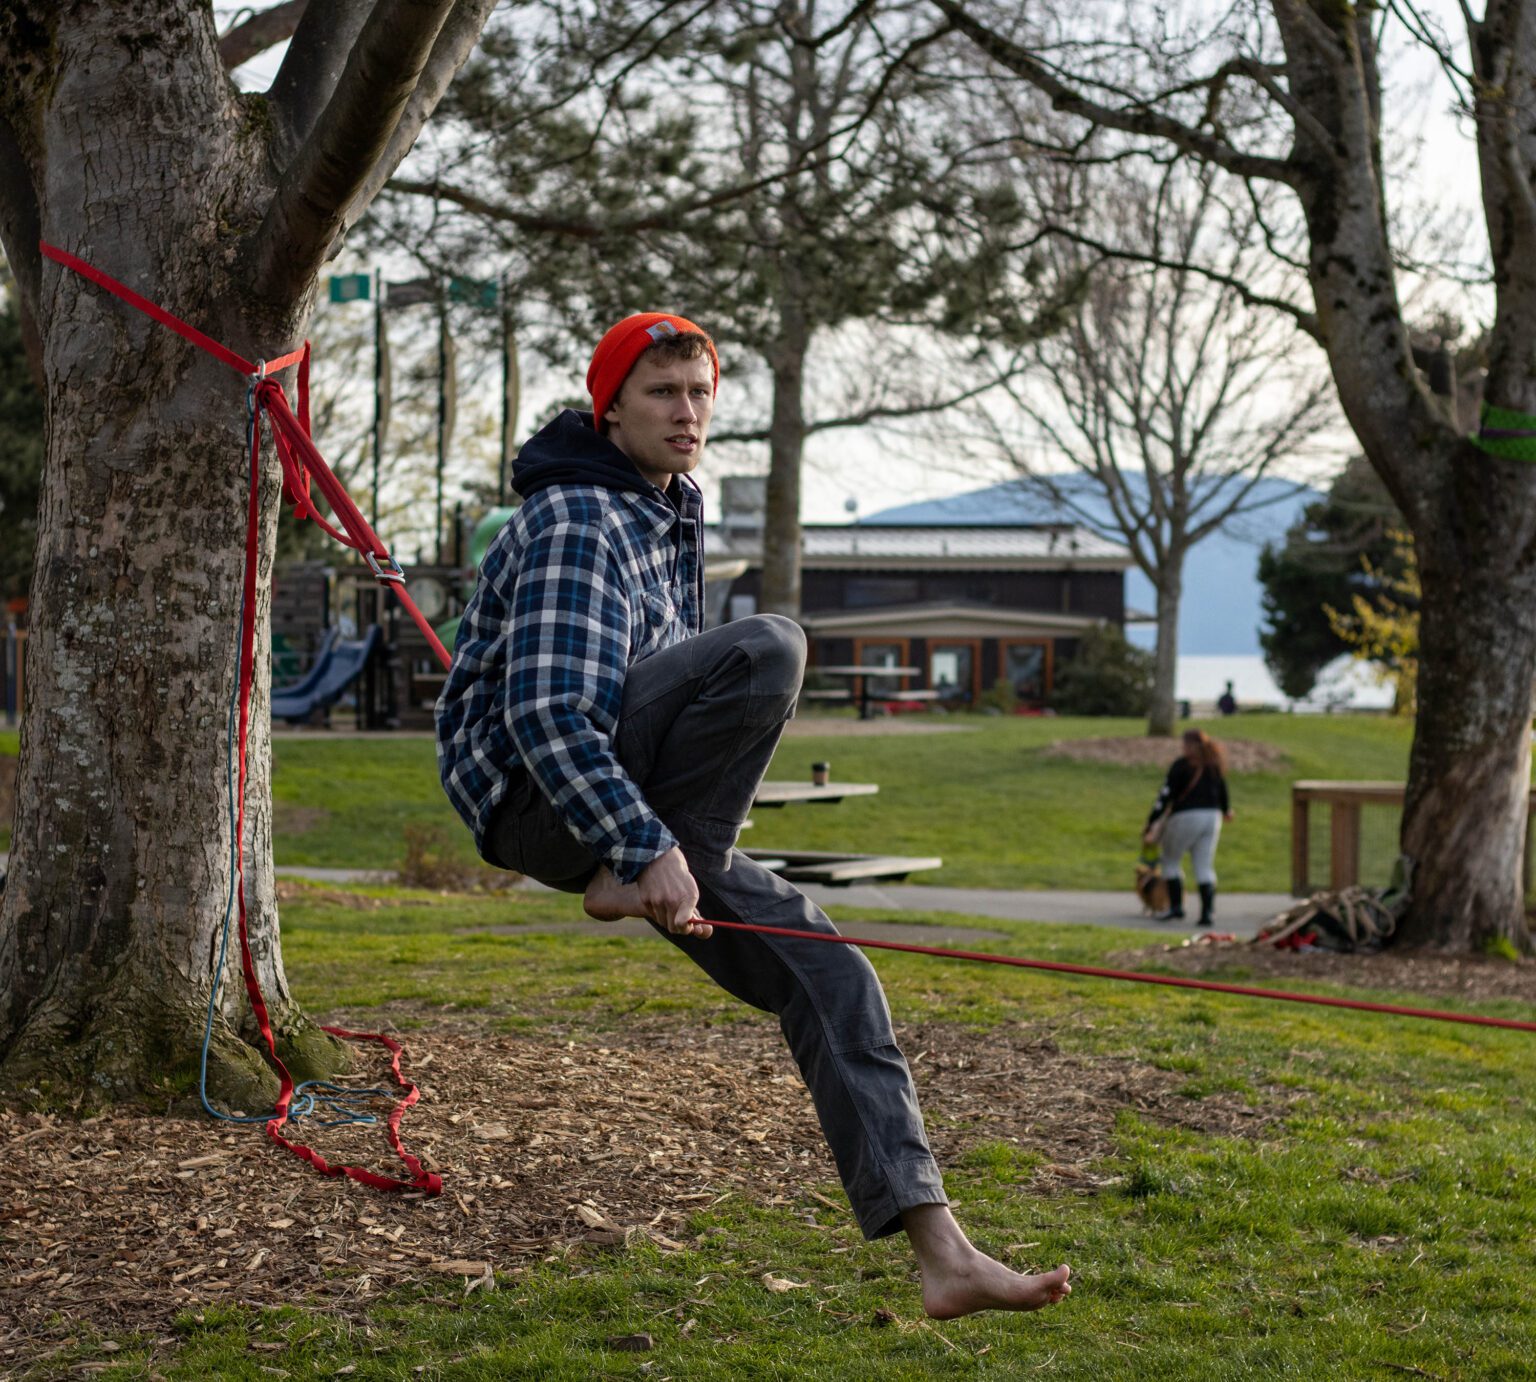 Chandler Johnston prepares to lift himself onto his slackline at Boulevard Park on April 14. Johnston has only been slacklining for a few months and can balance and walk the slackline.